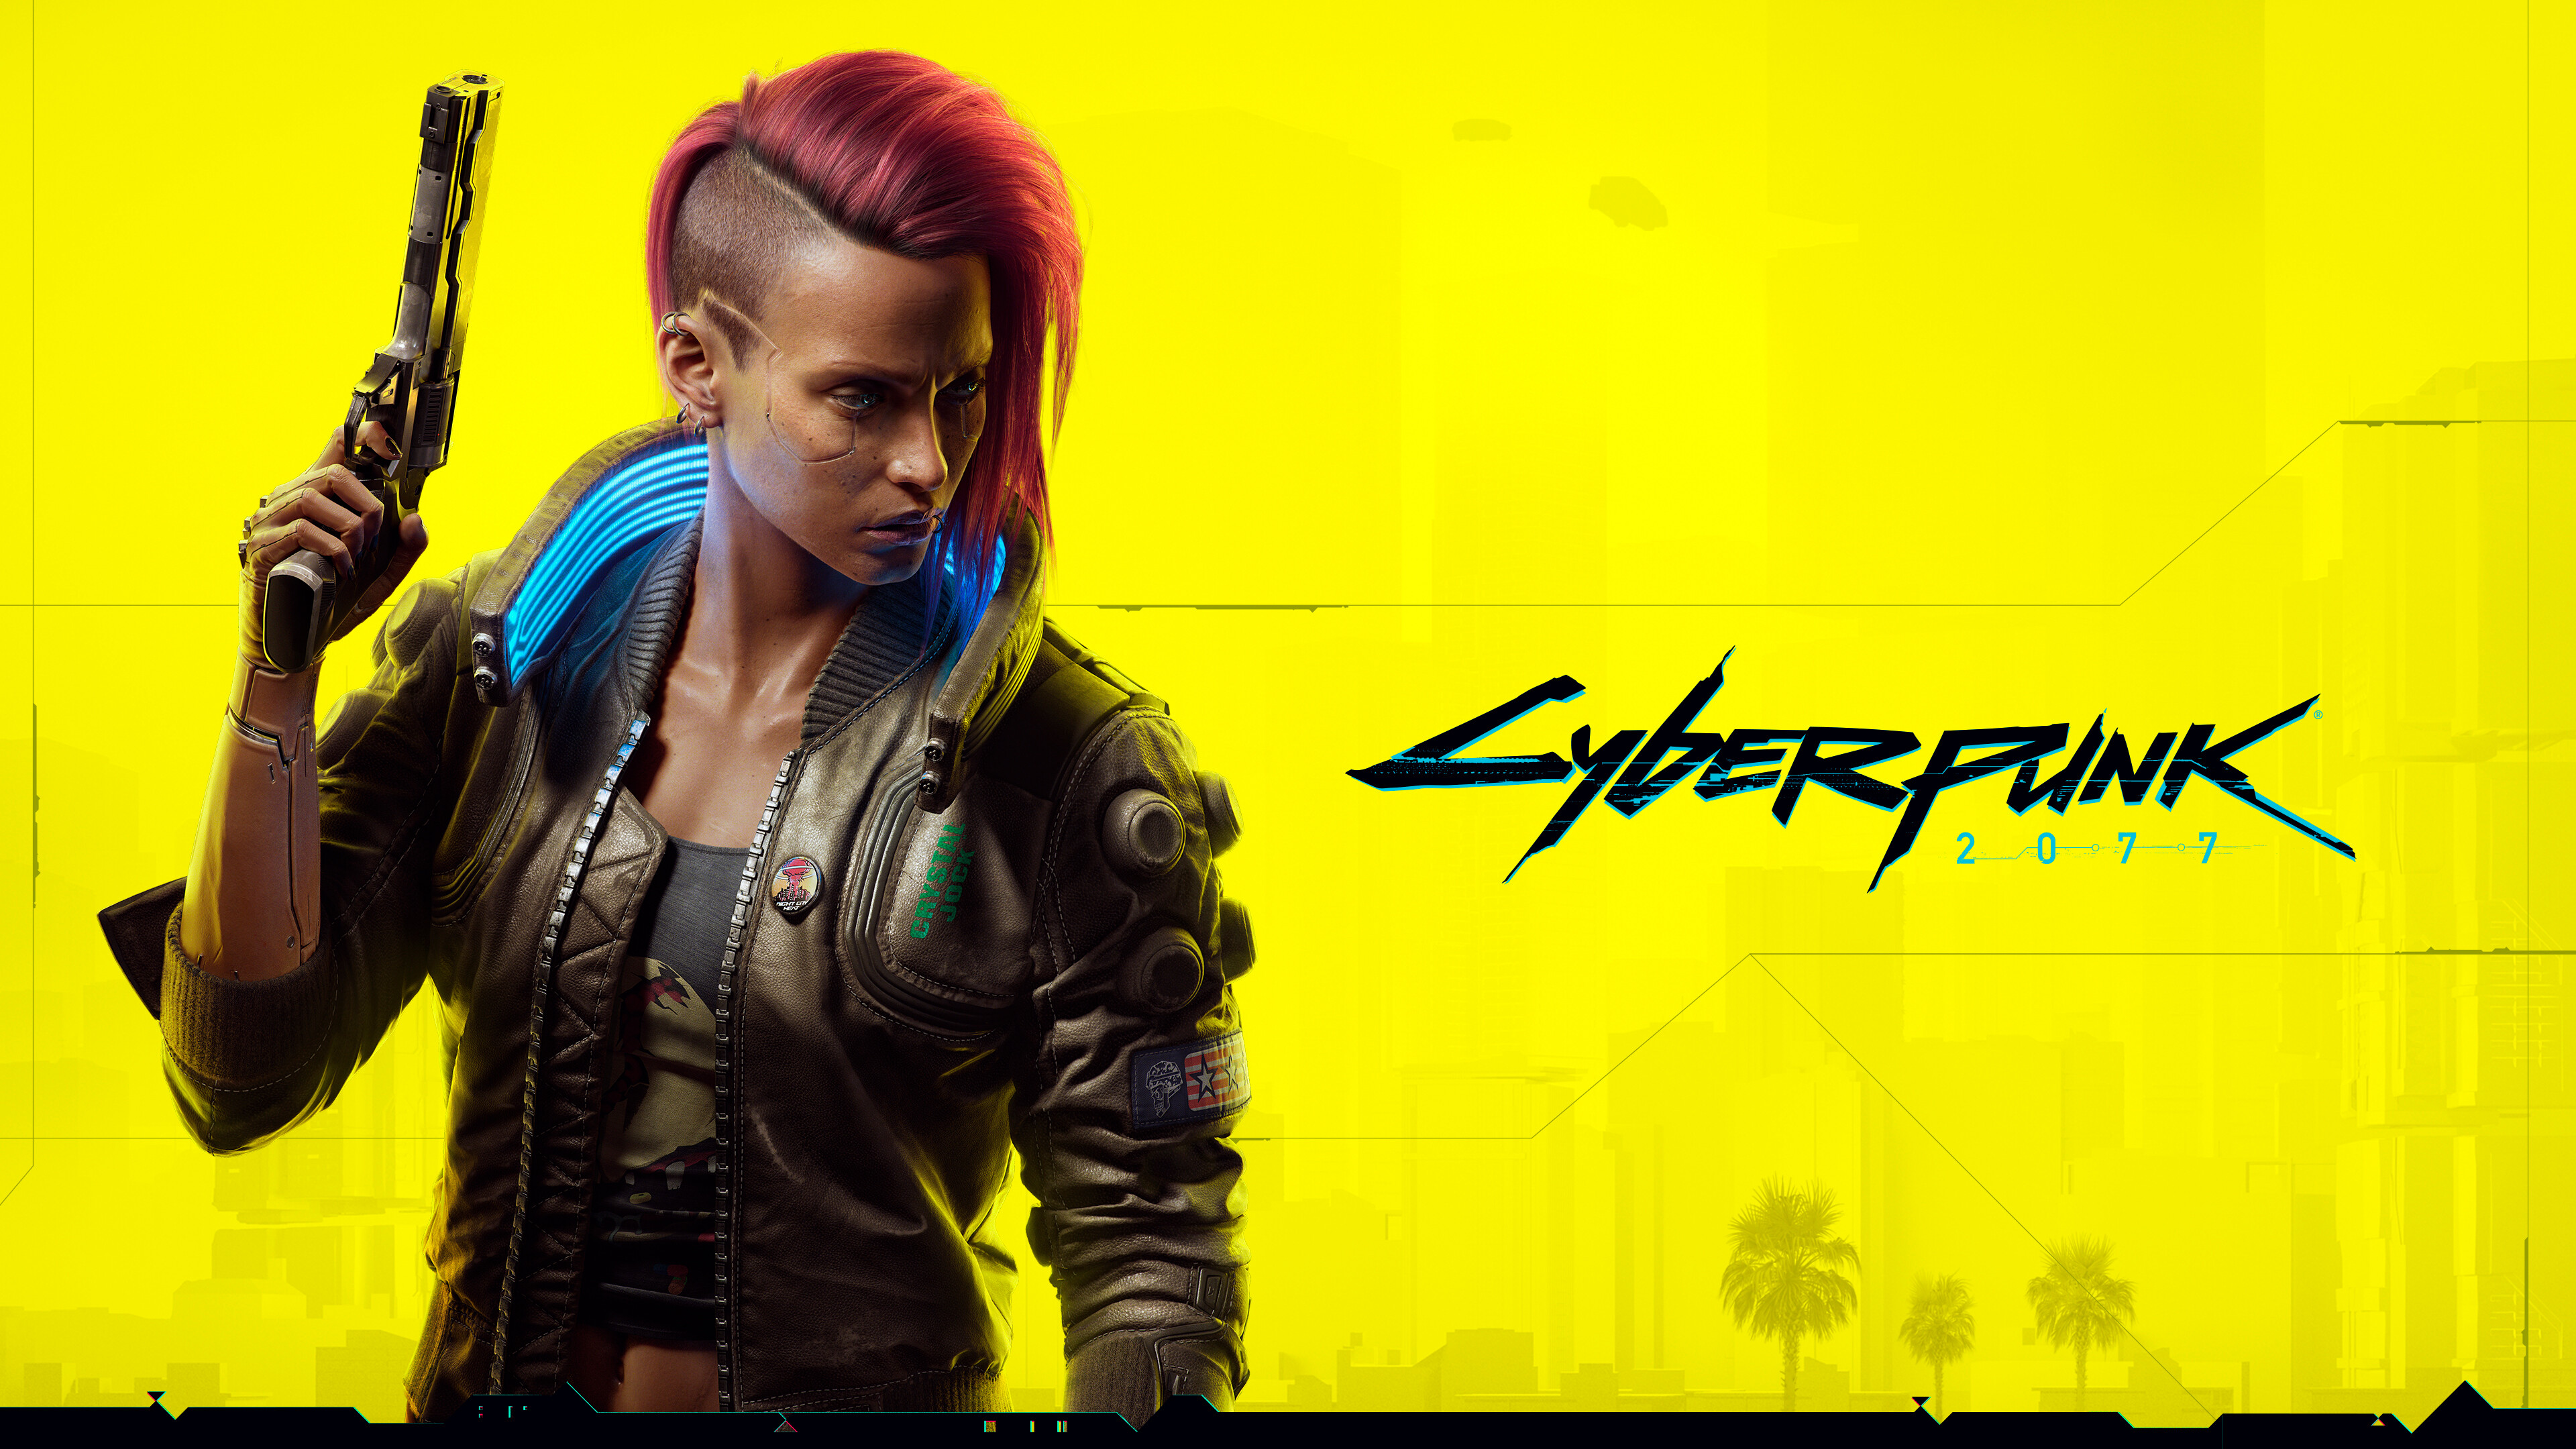 Cyberpunk 2077: Depending upon player actions throughout the game, V can choose different options to conduct the attack. 3840x2160 4K Wallpaper.